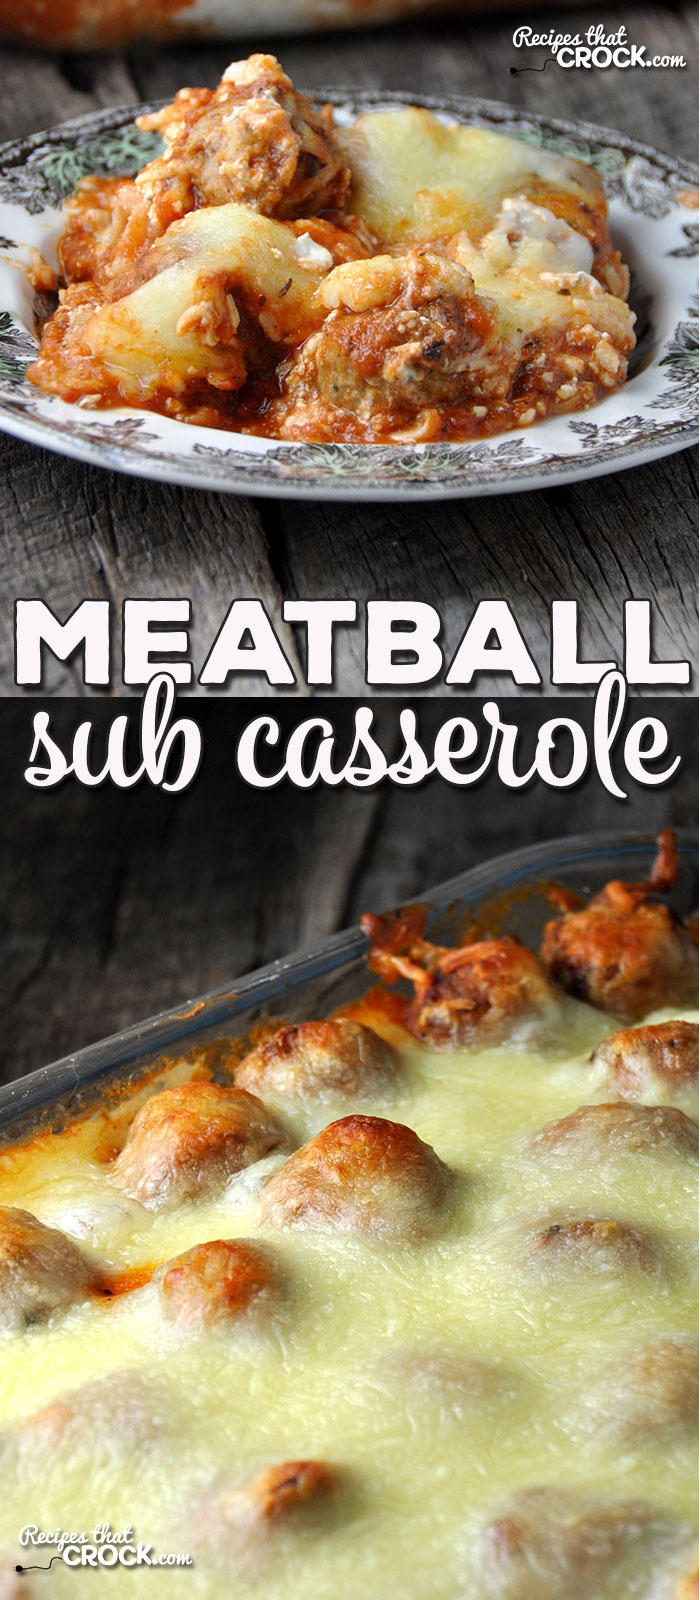 A while back, I made this delicious Crock Pot Meatball Sub Casserole. Then Diane, one of our readers asked how to make it in the oven. So, I couldn’t resist and had to make this Meatball Sub Casserole for you guys!